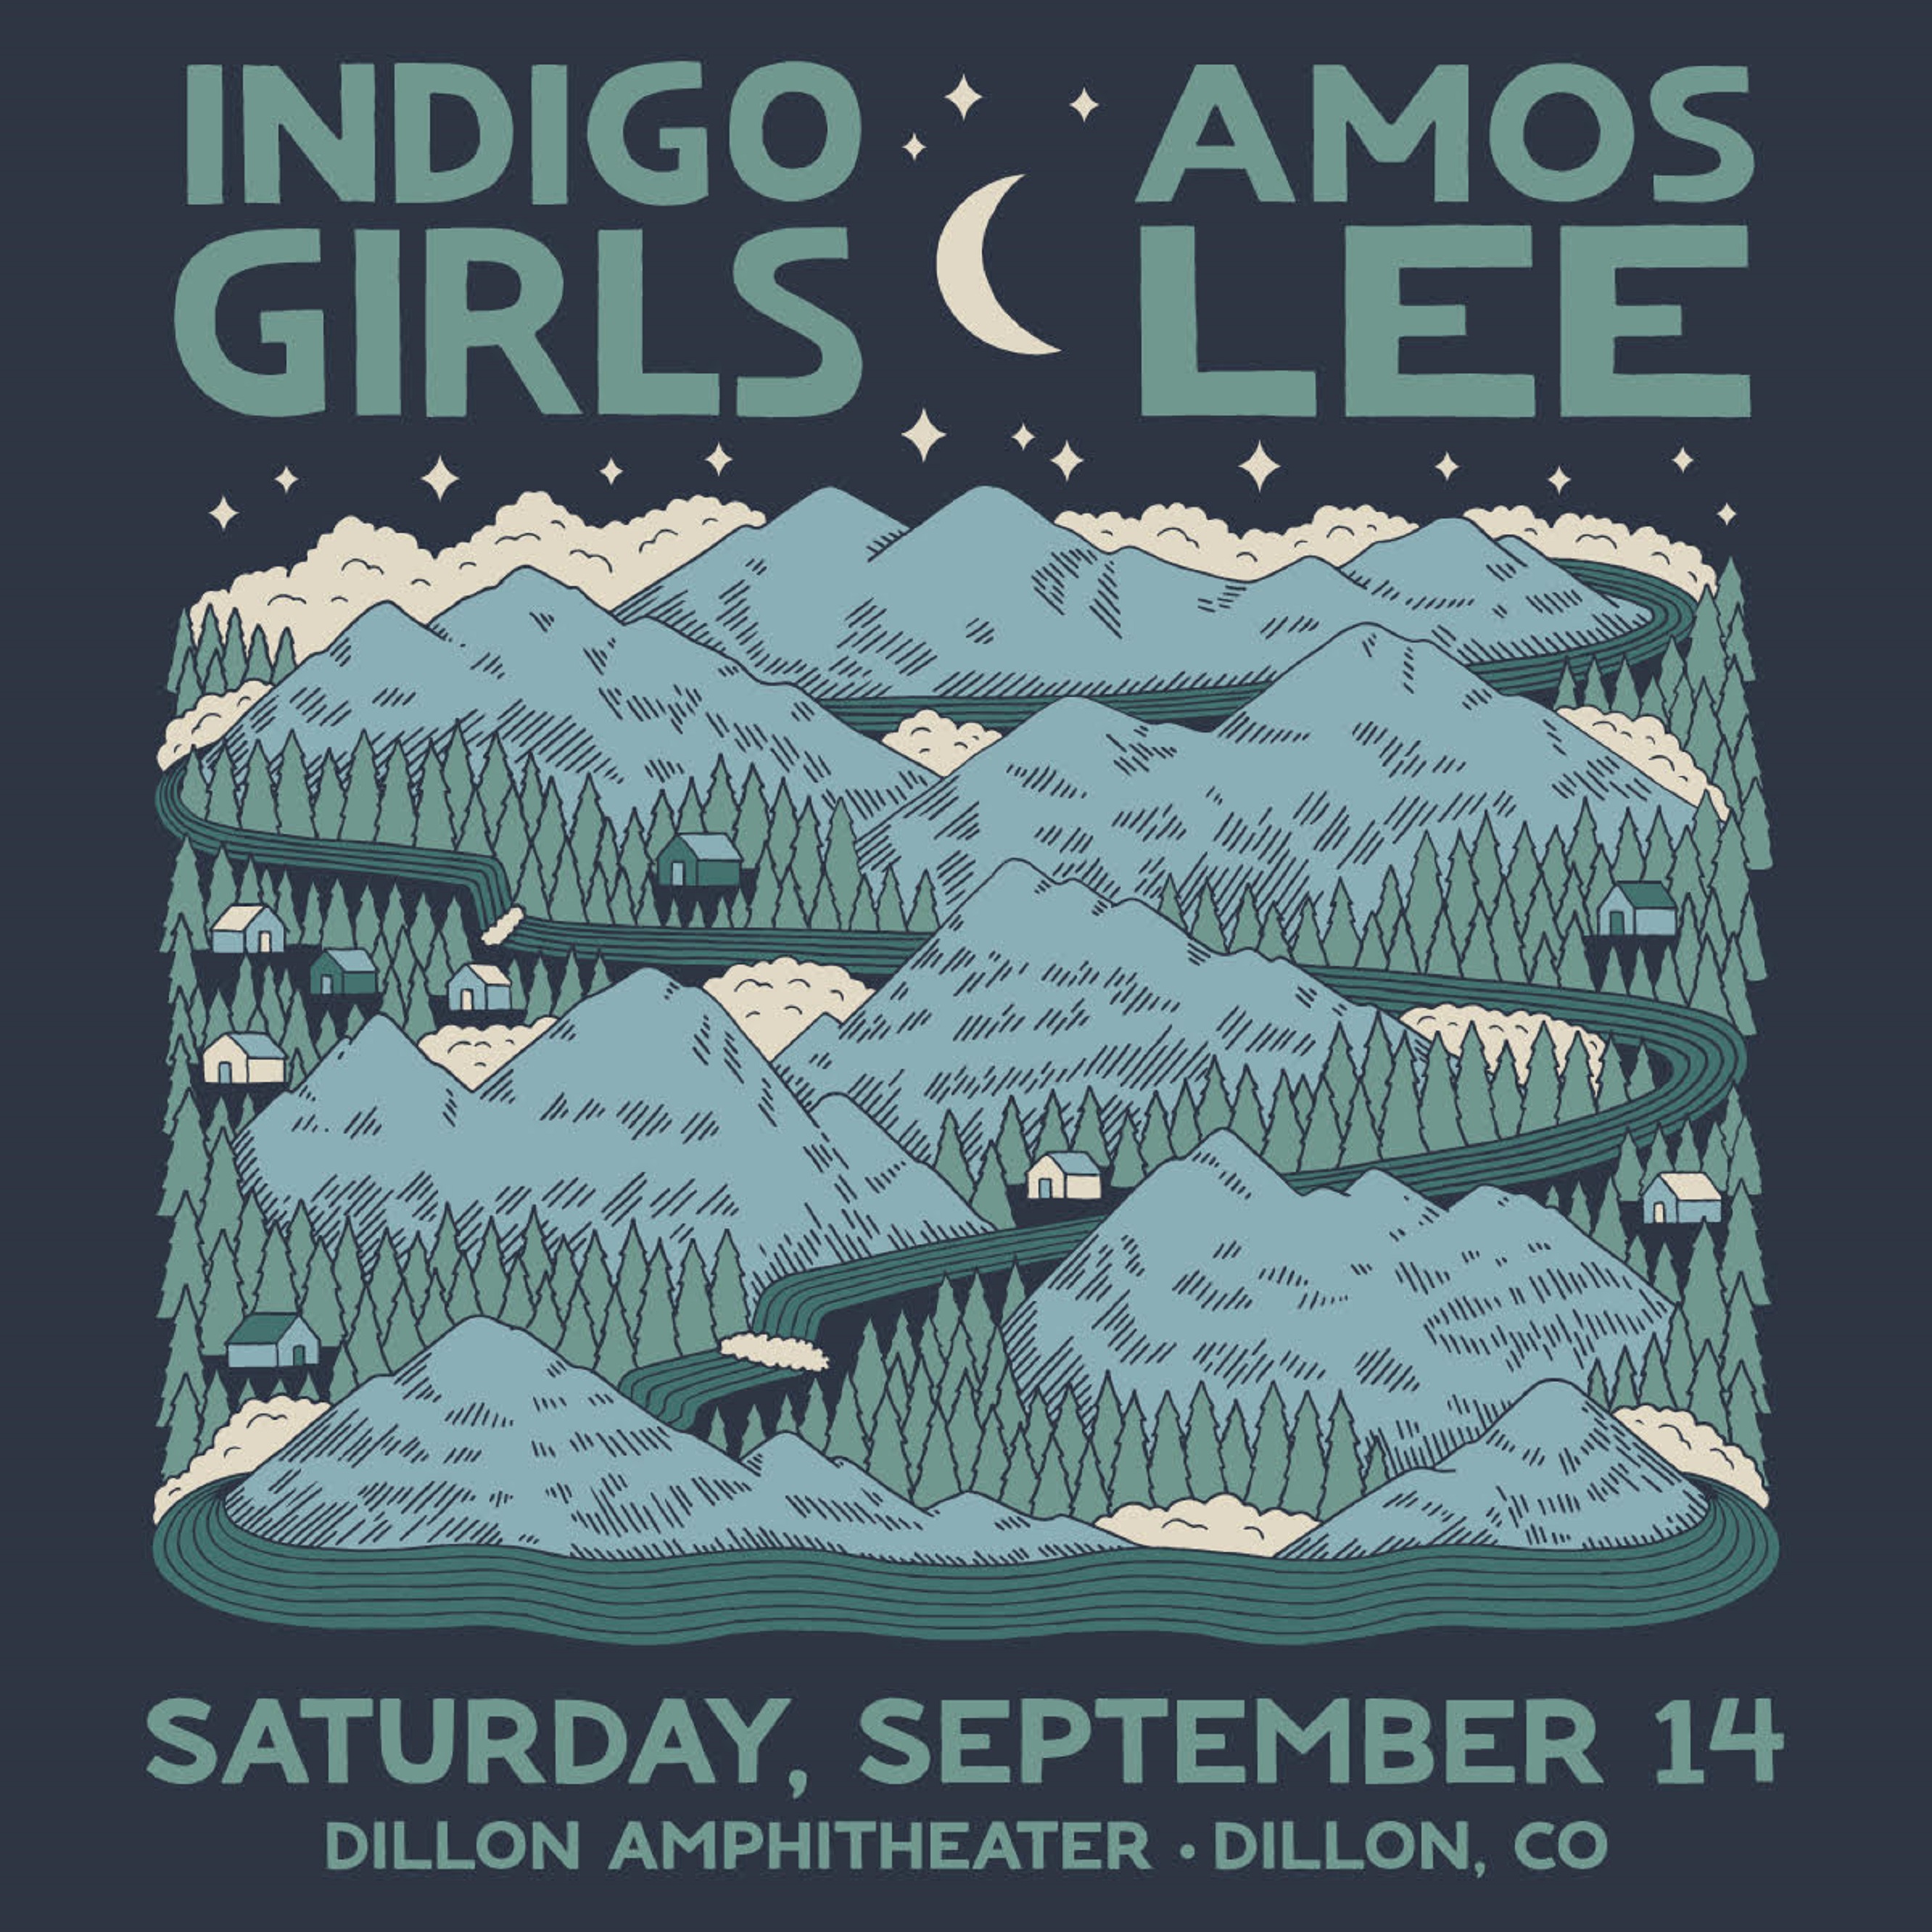 Indigo Girls and Amos Lee Announce North American Amphitheater Tour